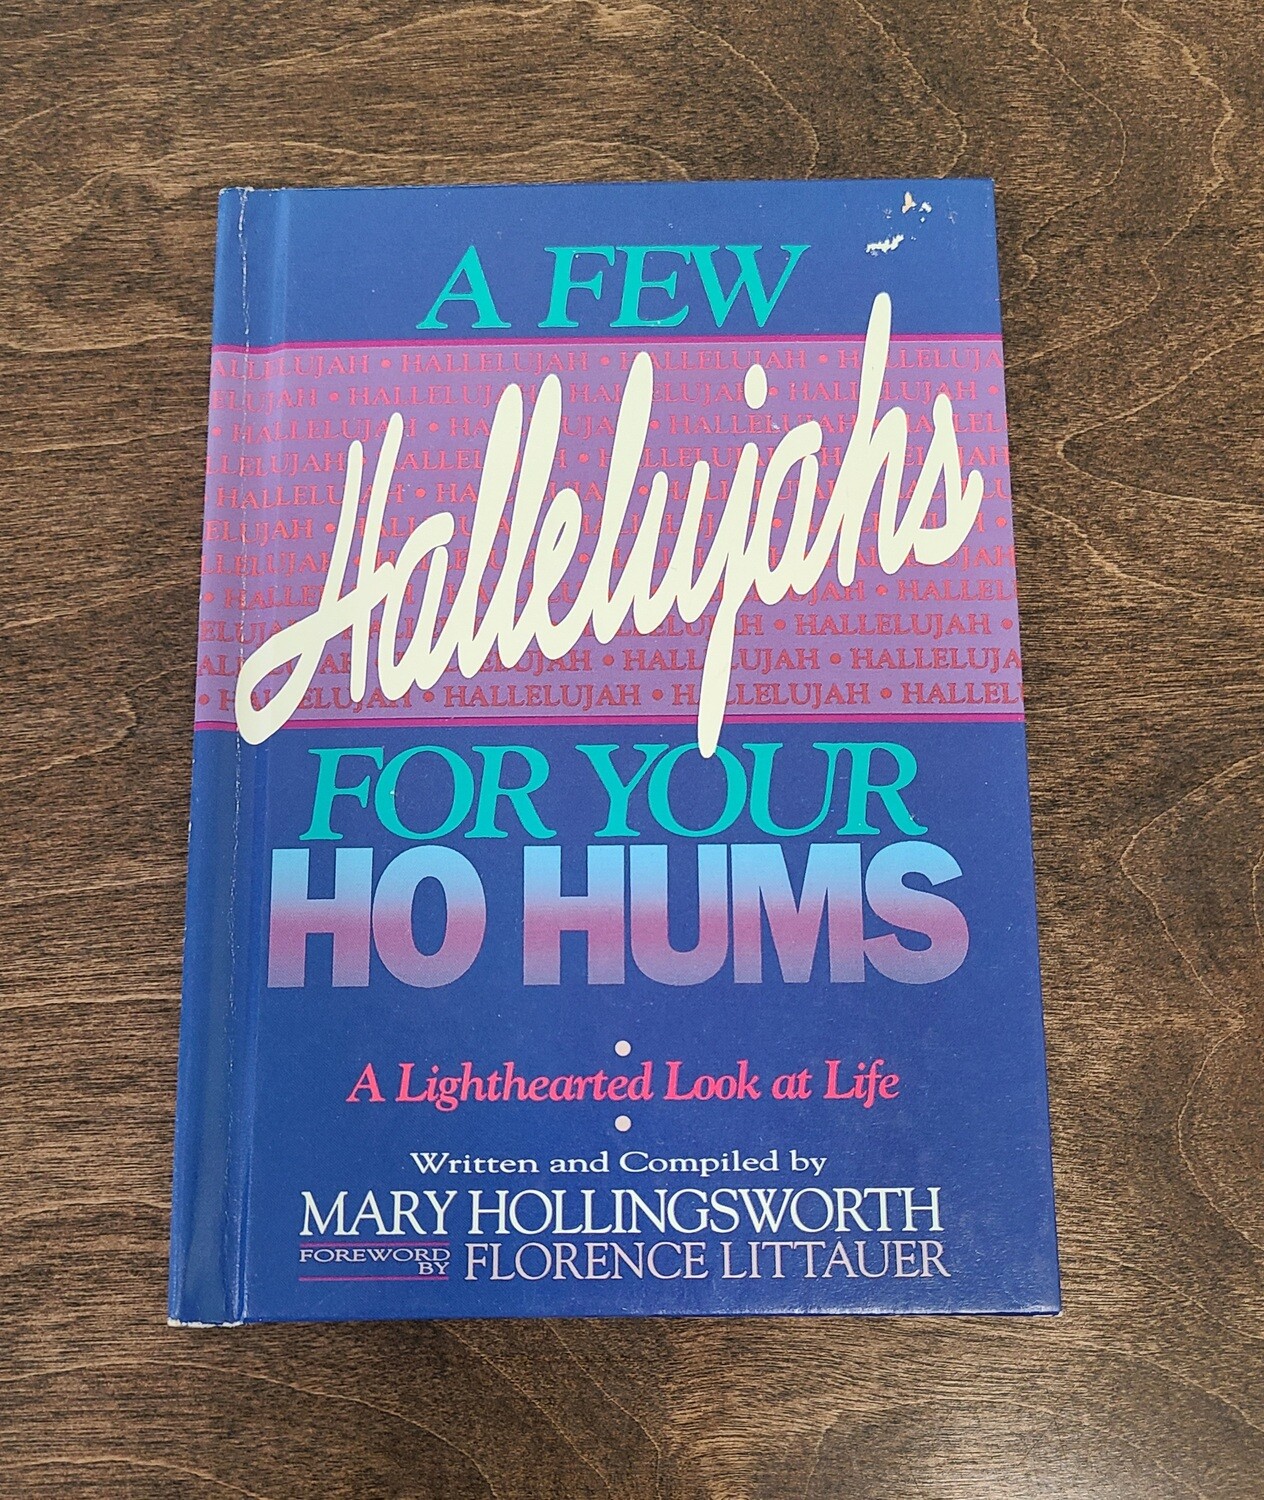 A Few Hallelujahs for Your Ho Hums by Mary Hollingsworth